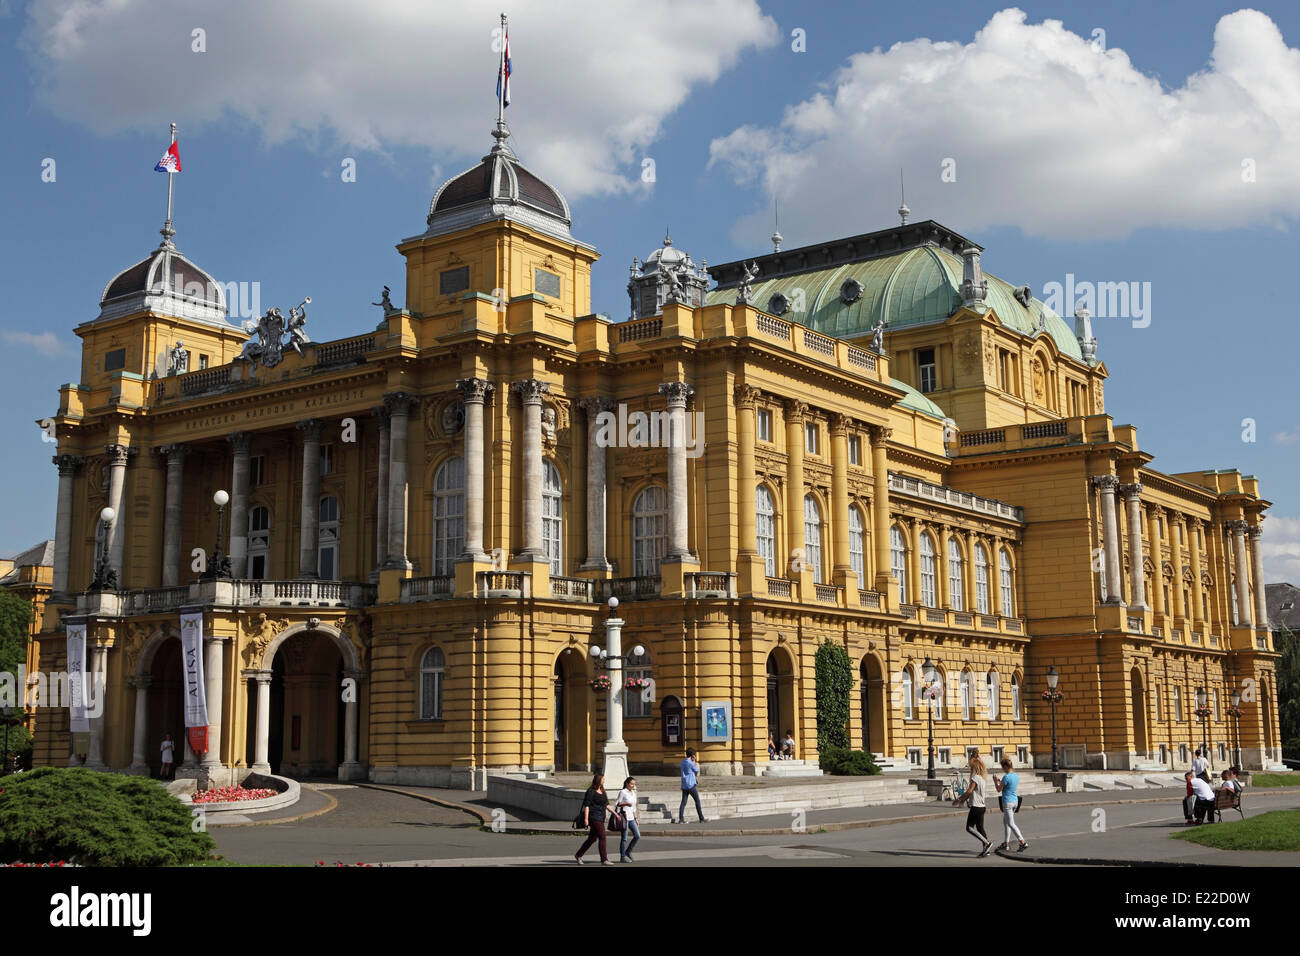 Croatian National Theatre, also known as the HNK Zagreb, in Zagreb, Croatia. Stock Photo